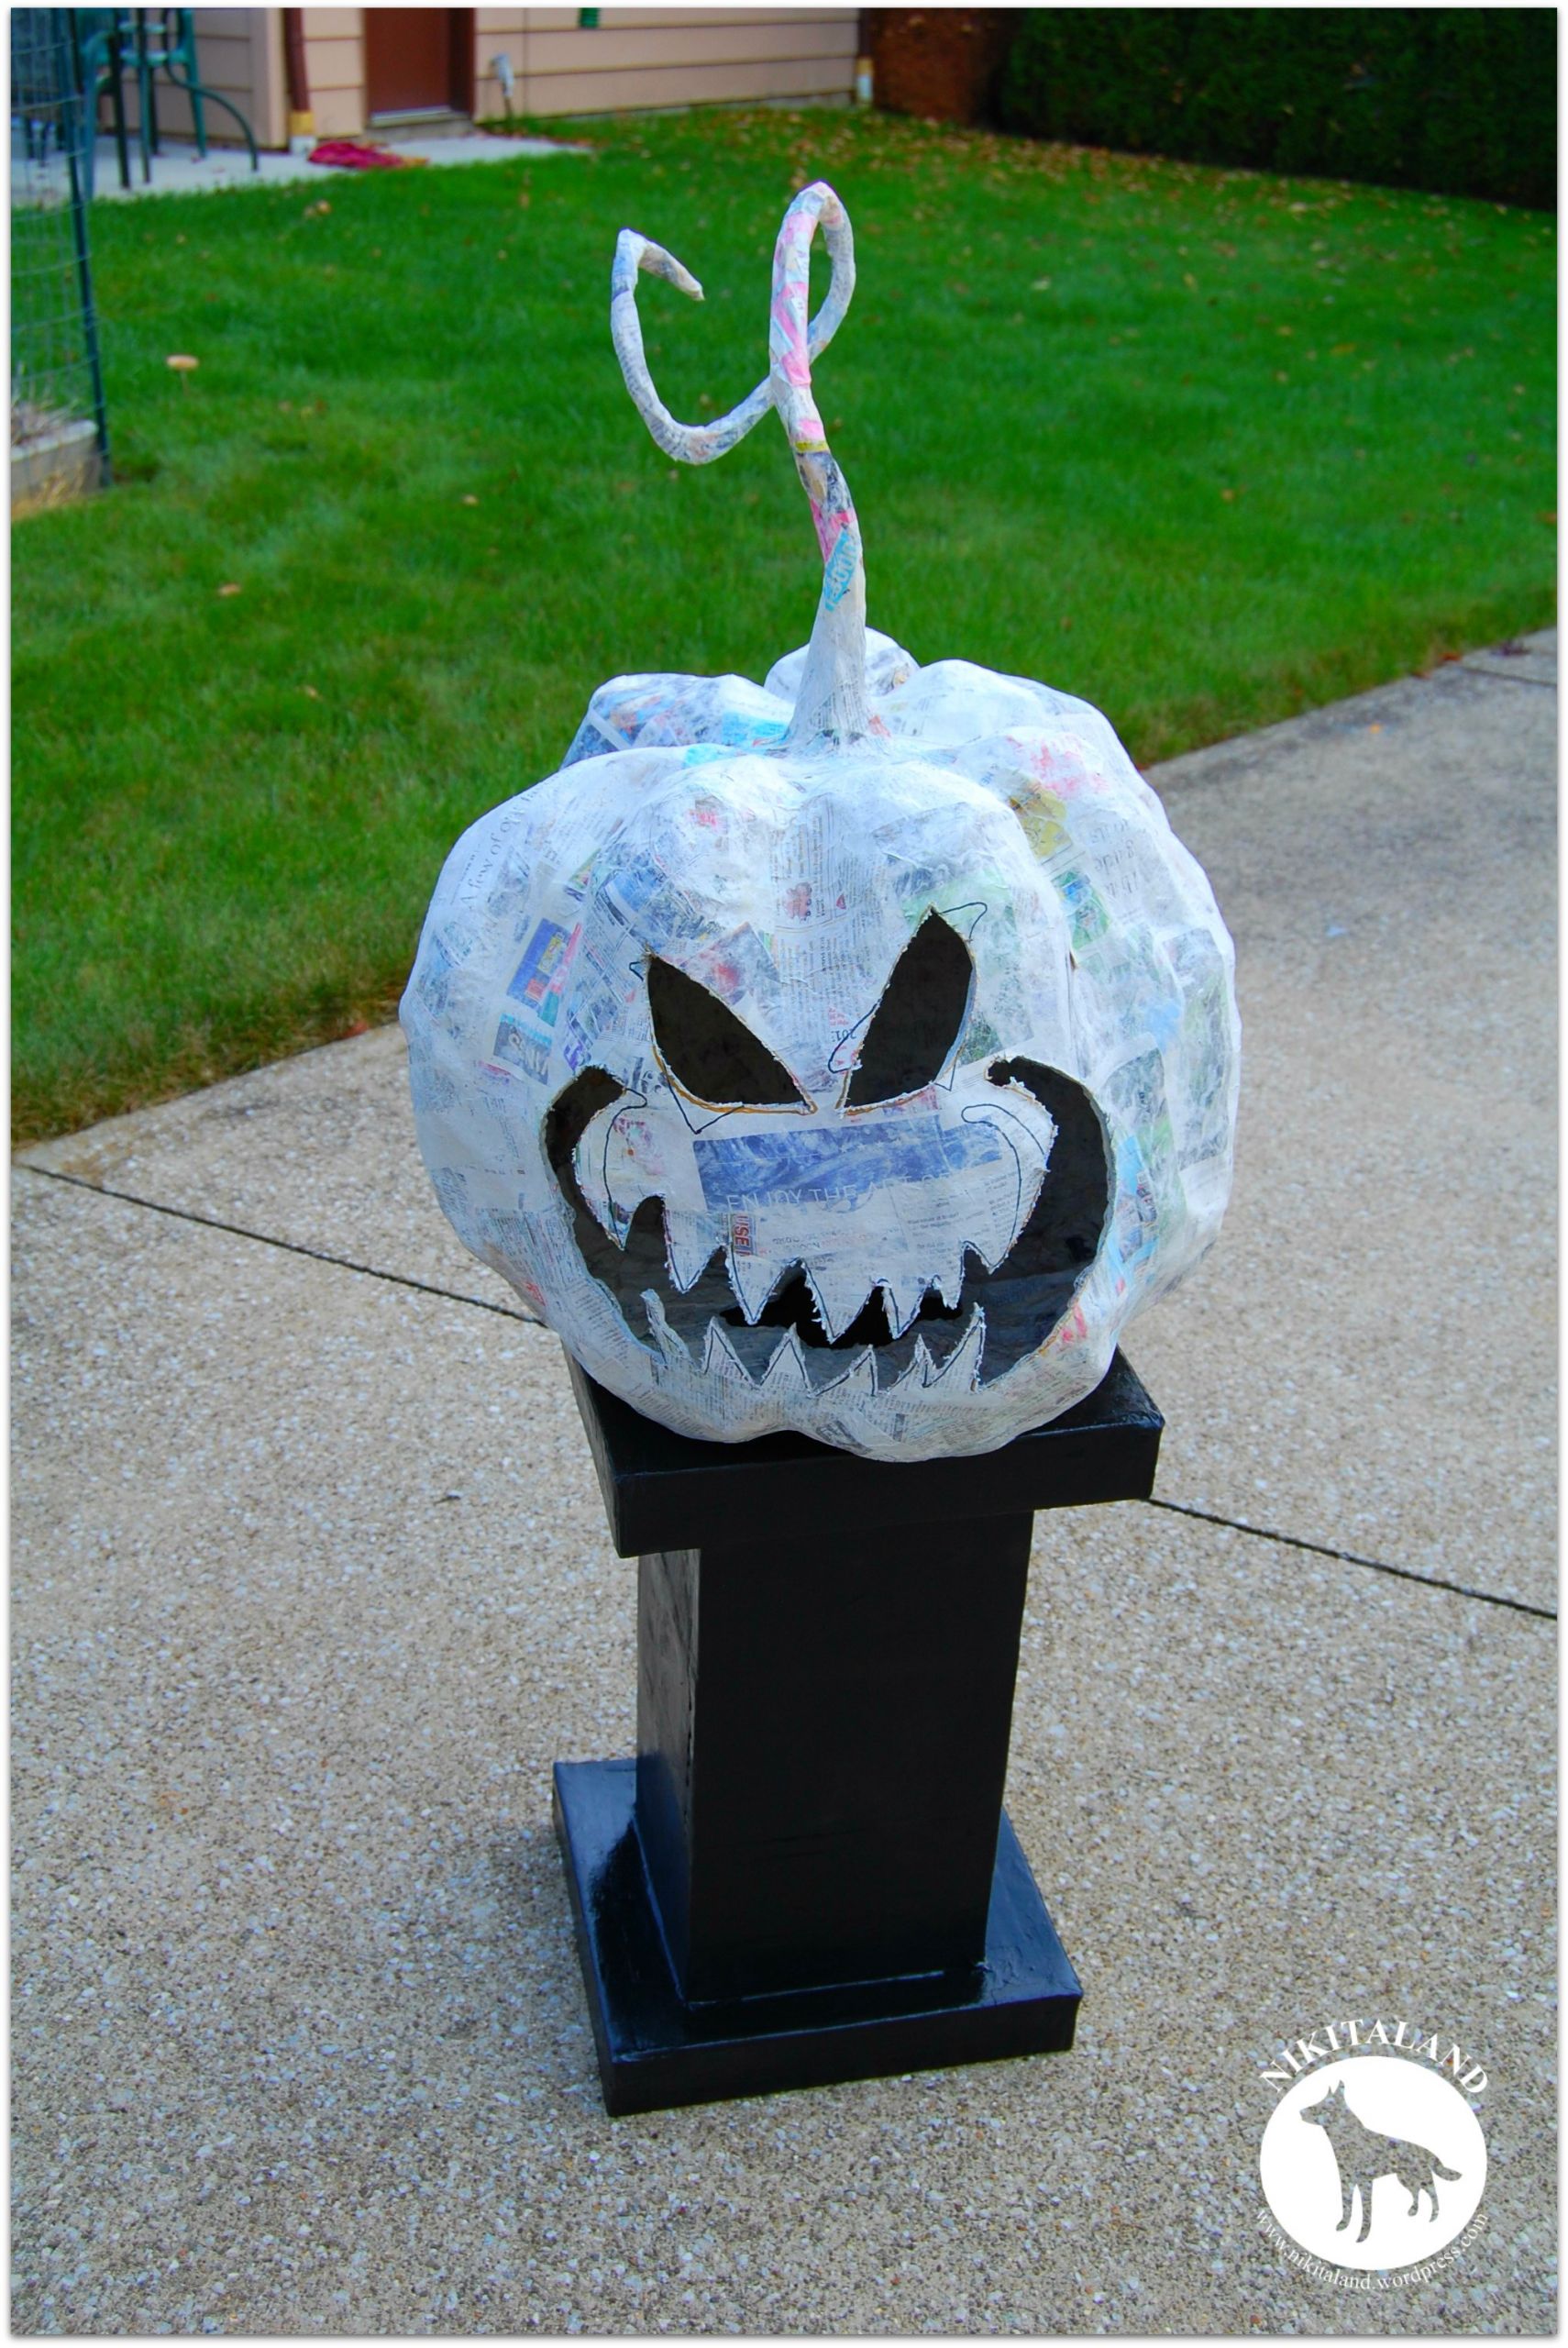 DIY Paper Halloween Decorations
 How to Make a Paper Mache Stand